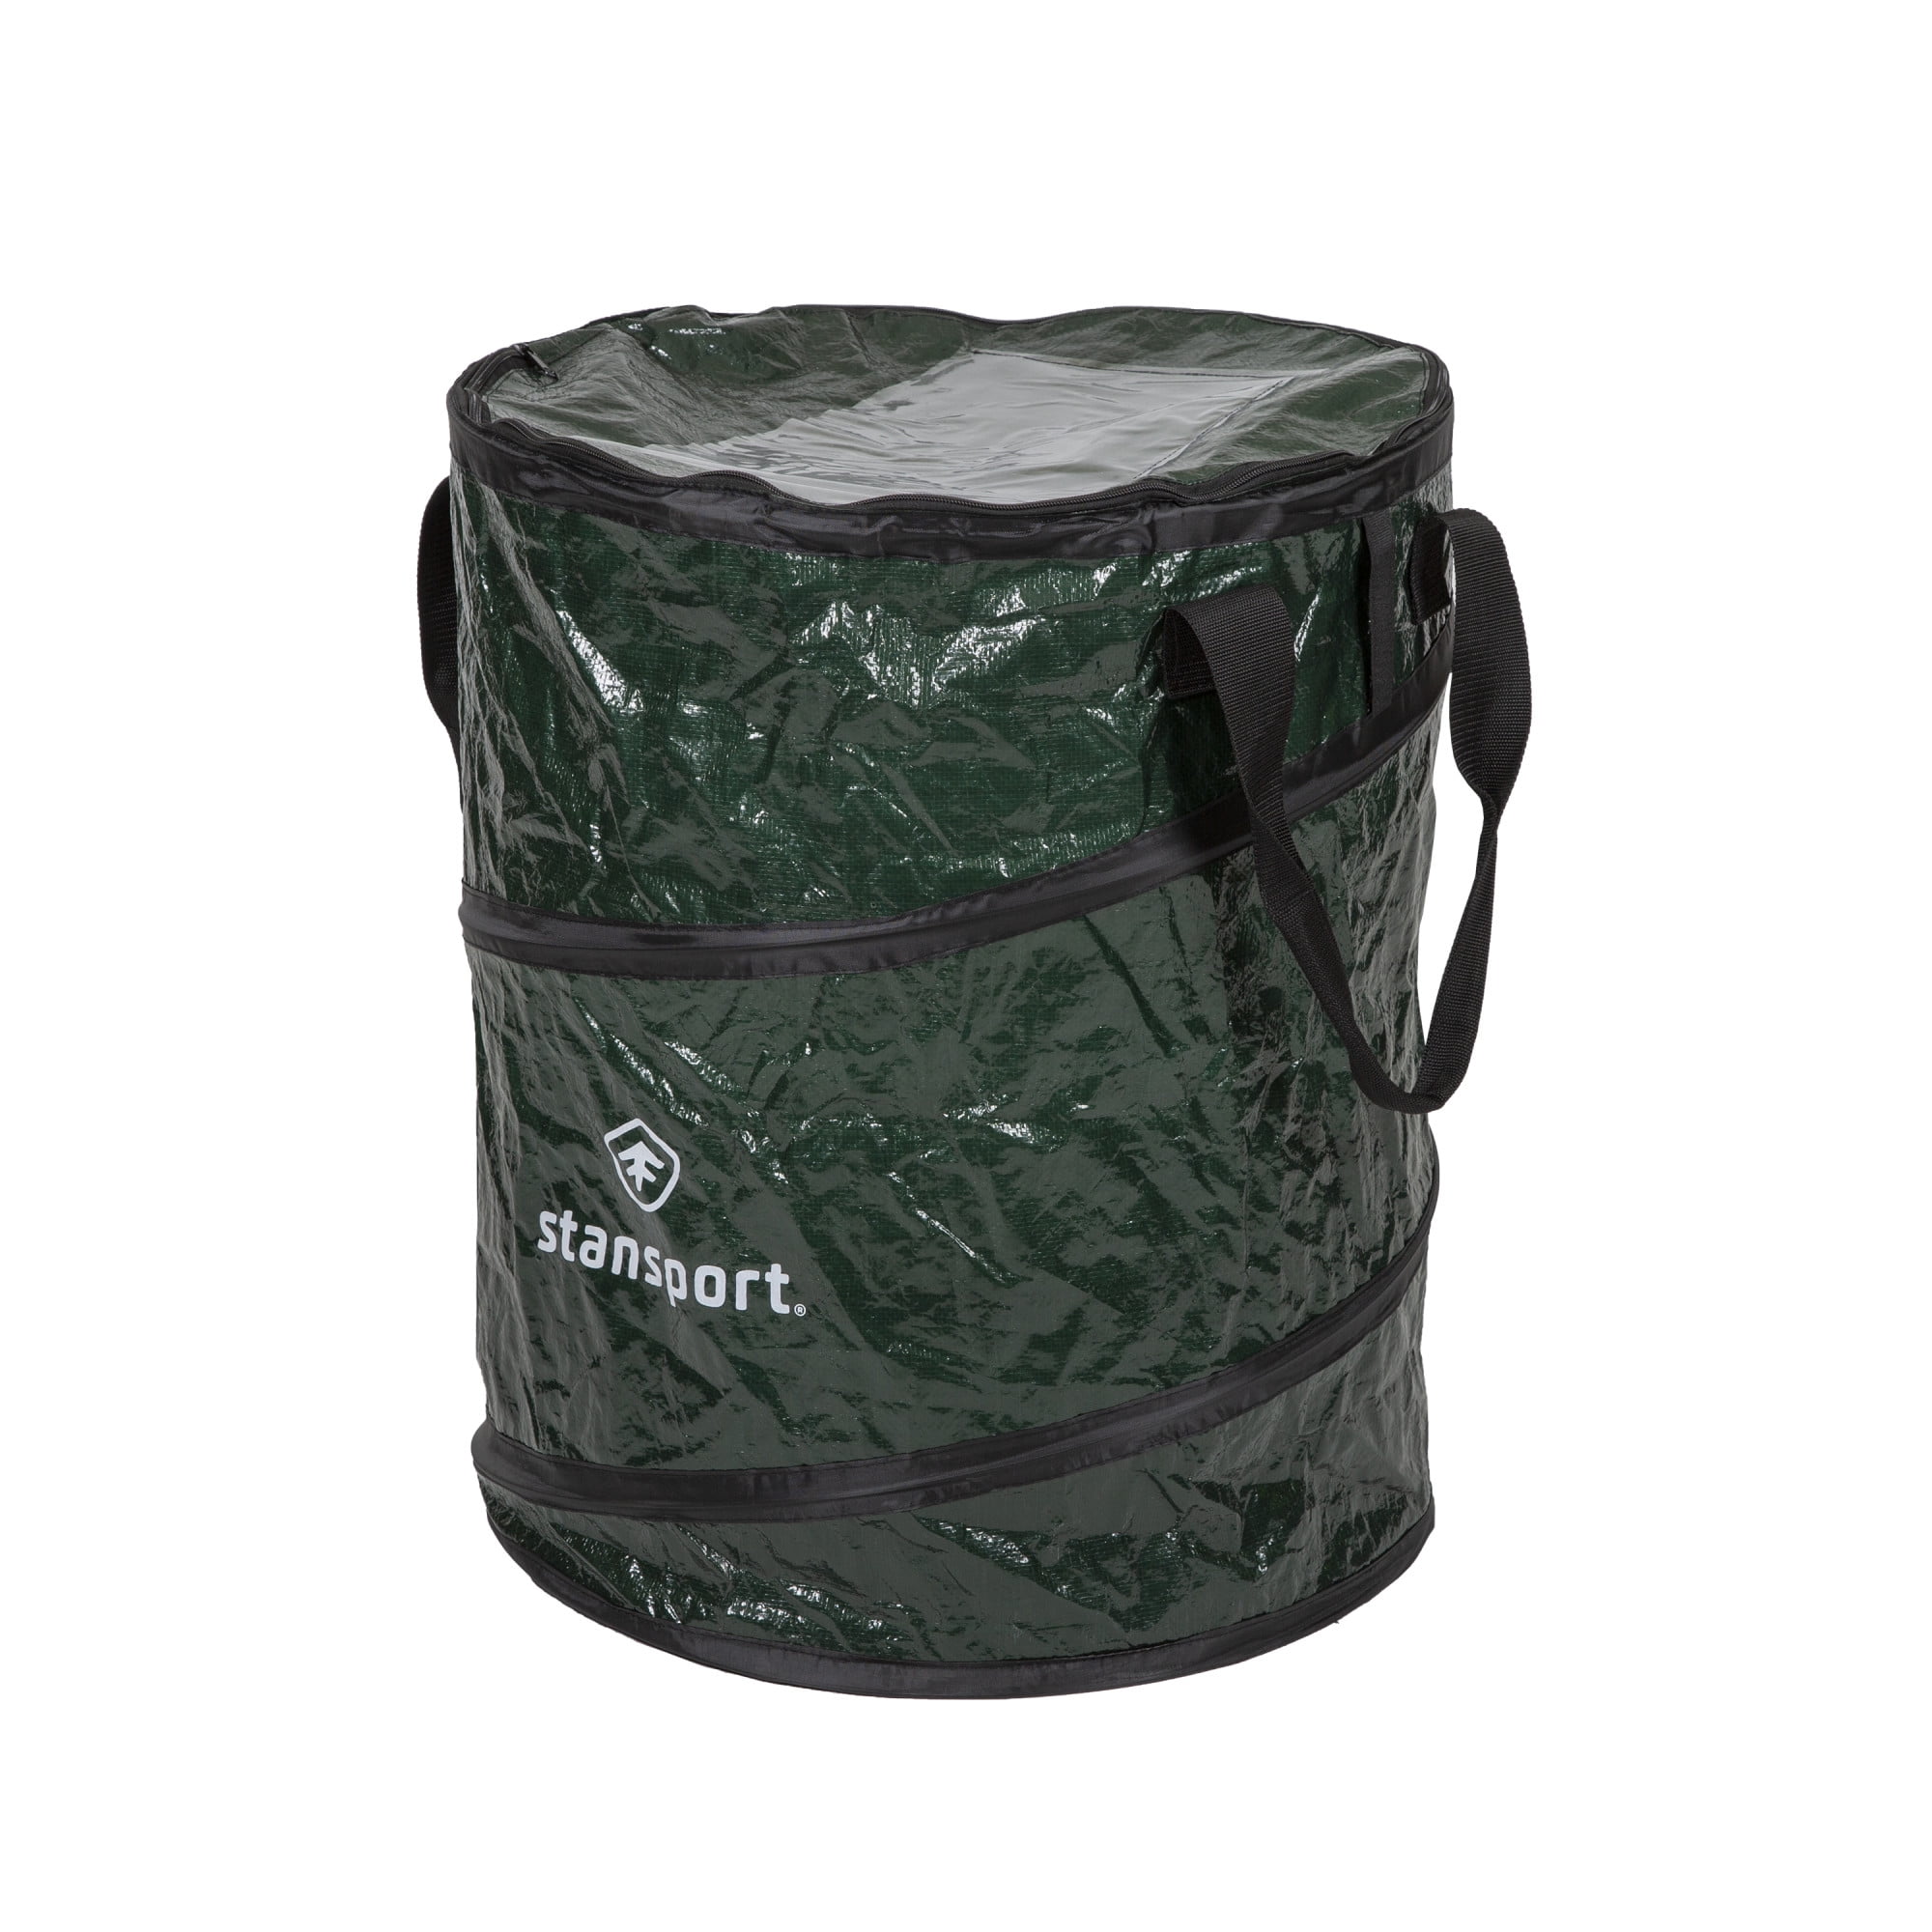 Stansport Collapsible Trash Can Green